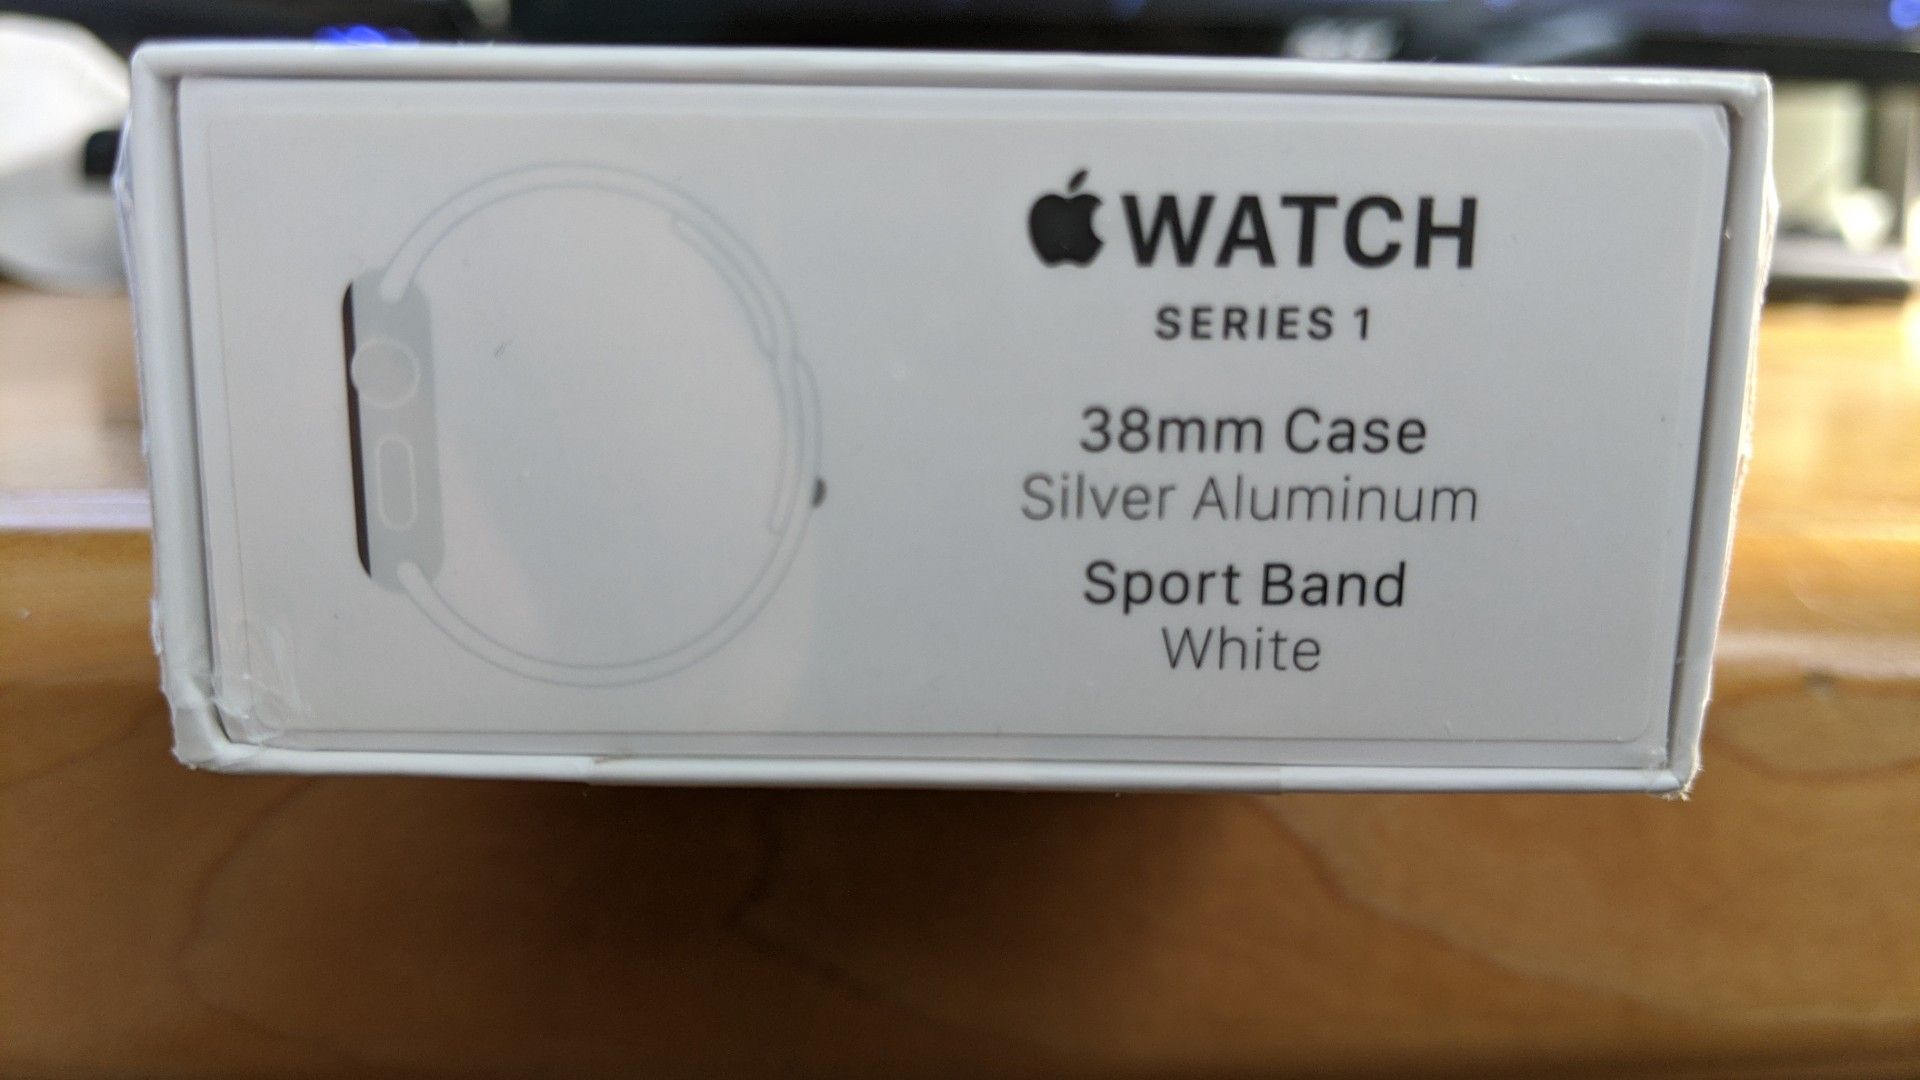 Apple watch series 1 (38mm) Silver aluminum case with white sport band. Unopened. Brand new.